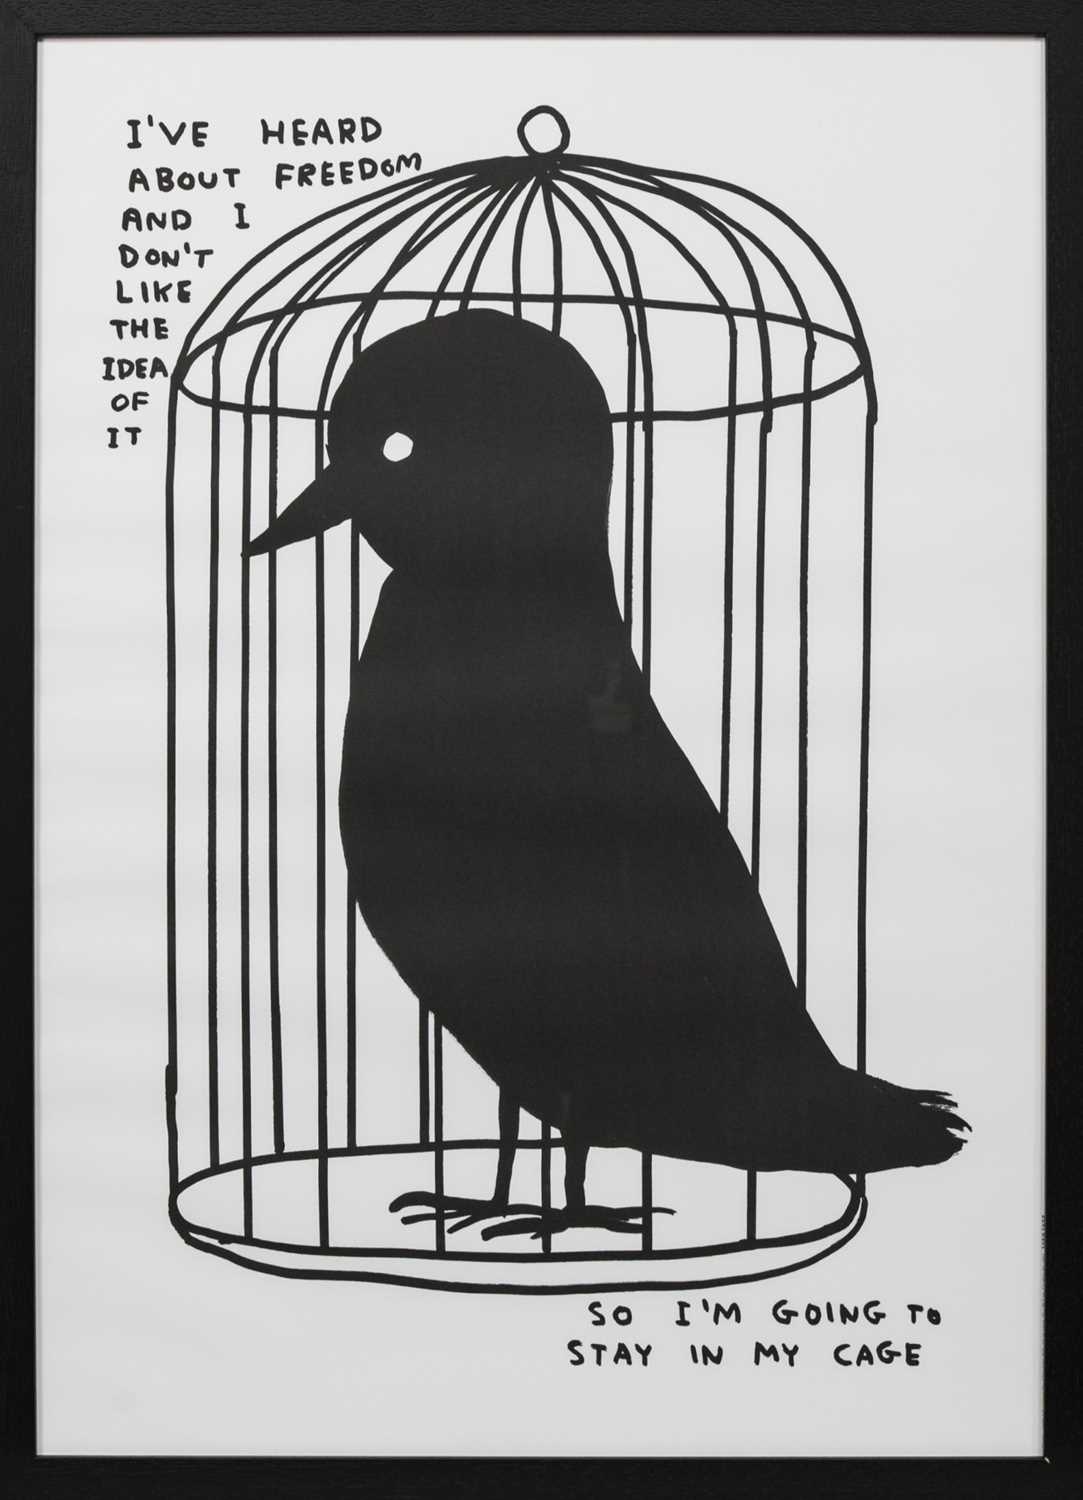 Lot 87 - I'VE HEARD ABOUT FREEDOM, A LITHOGRAPH BY DAVID SHRIGLEY